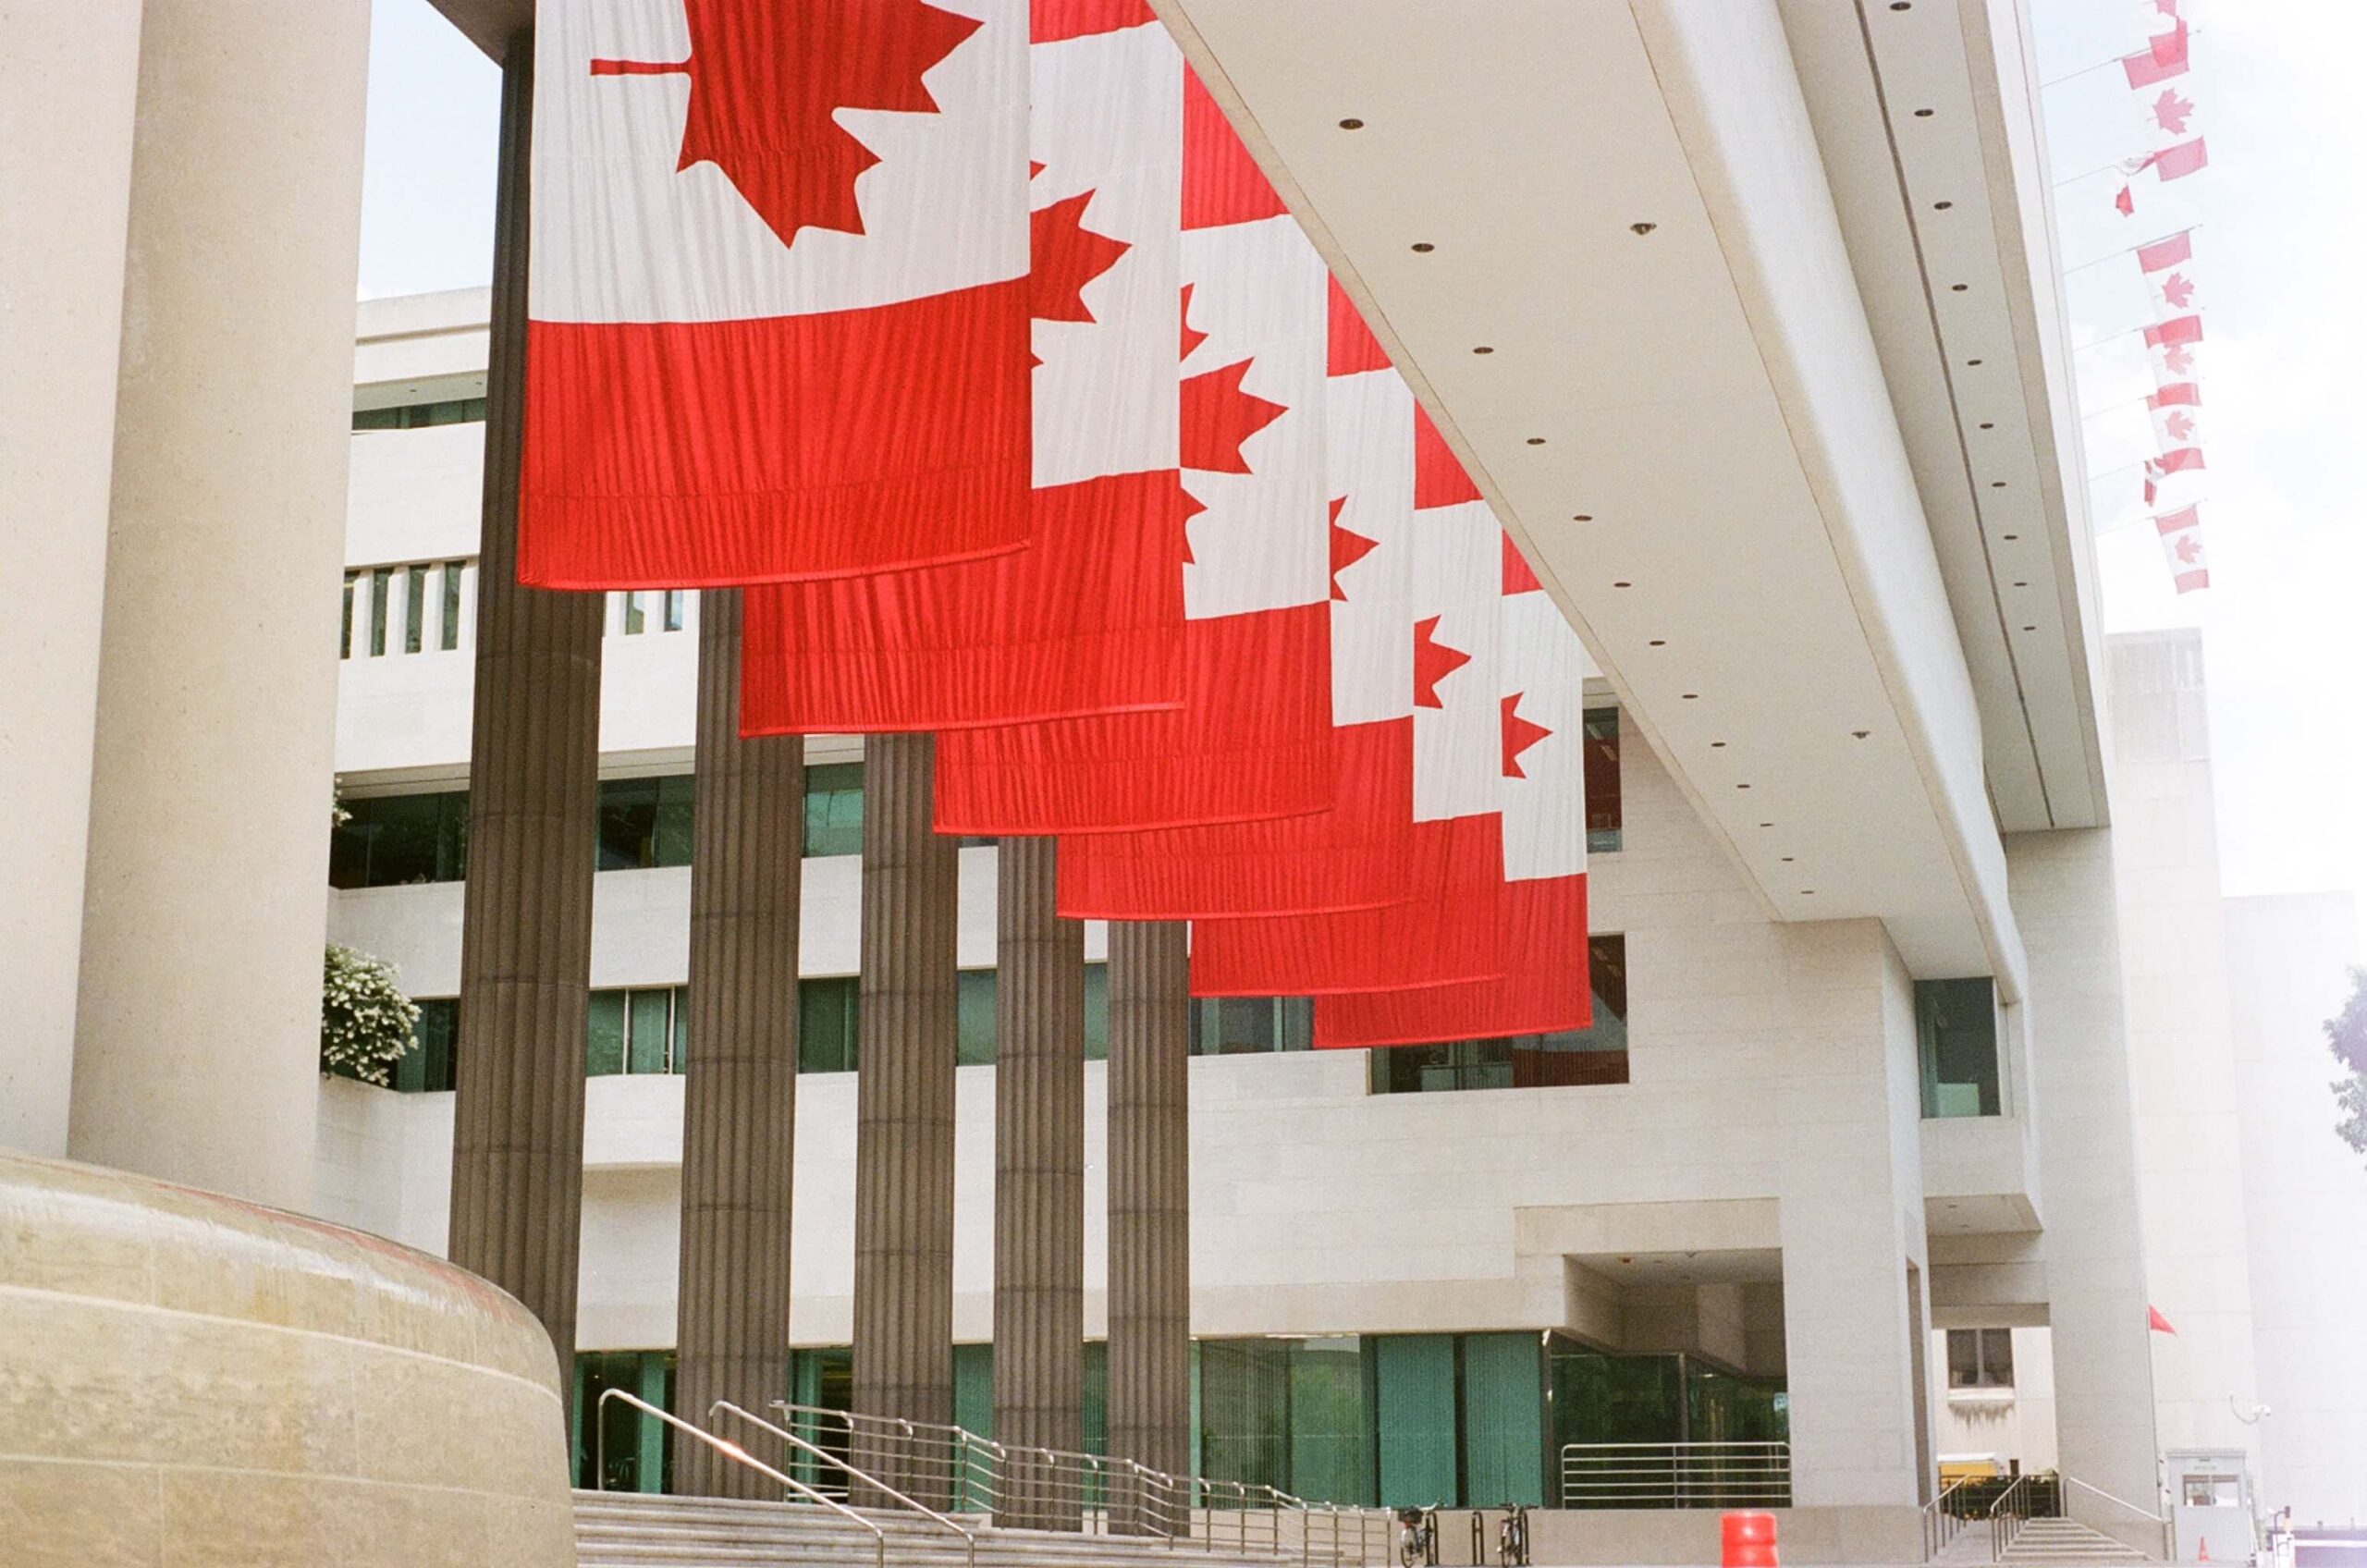 canadian flags